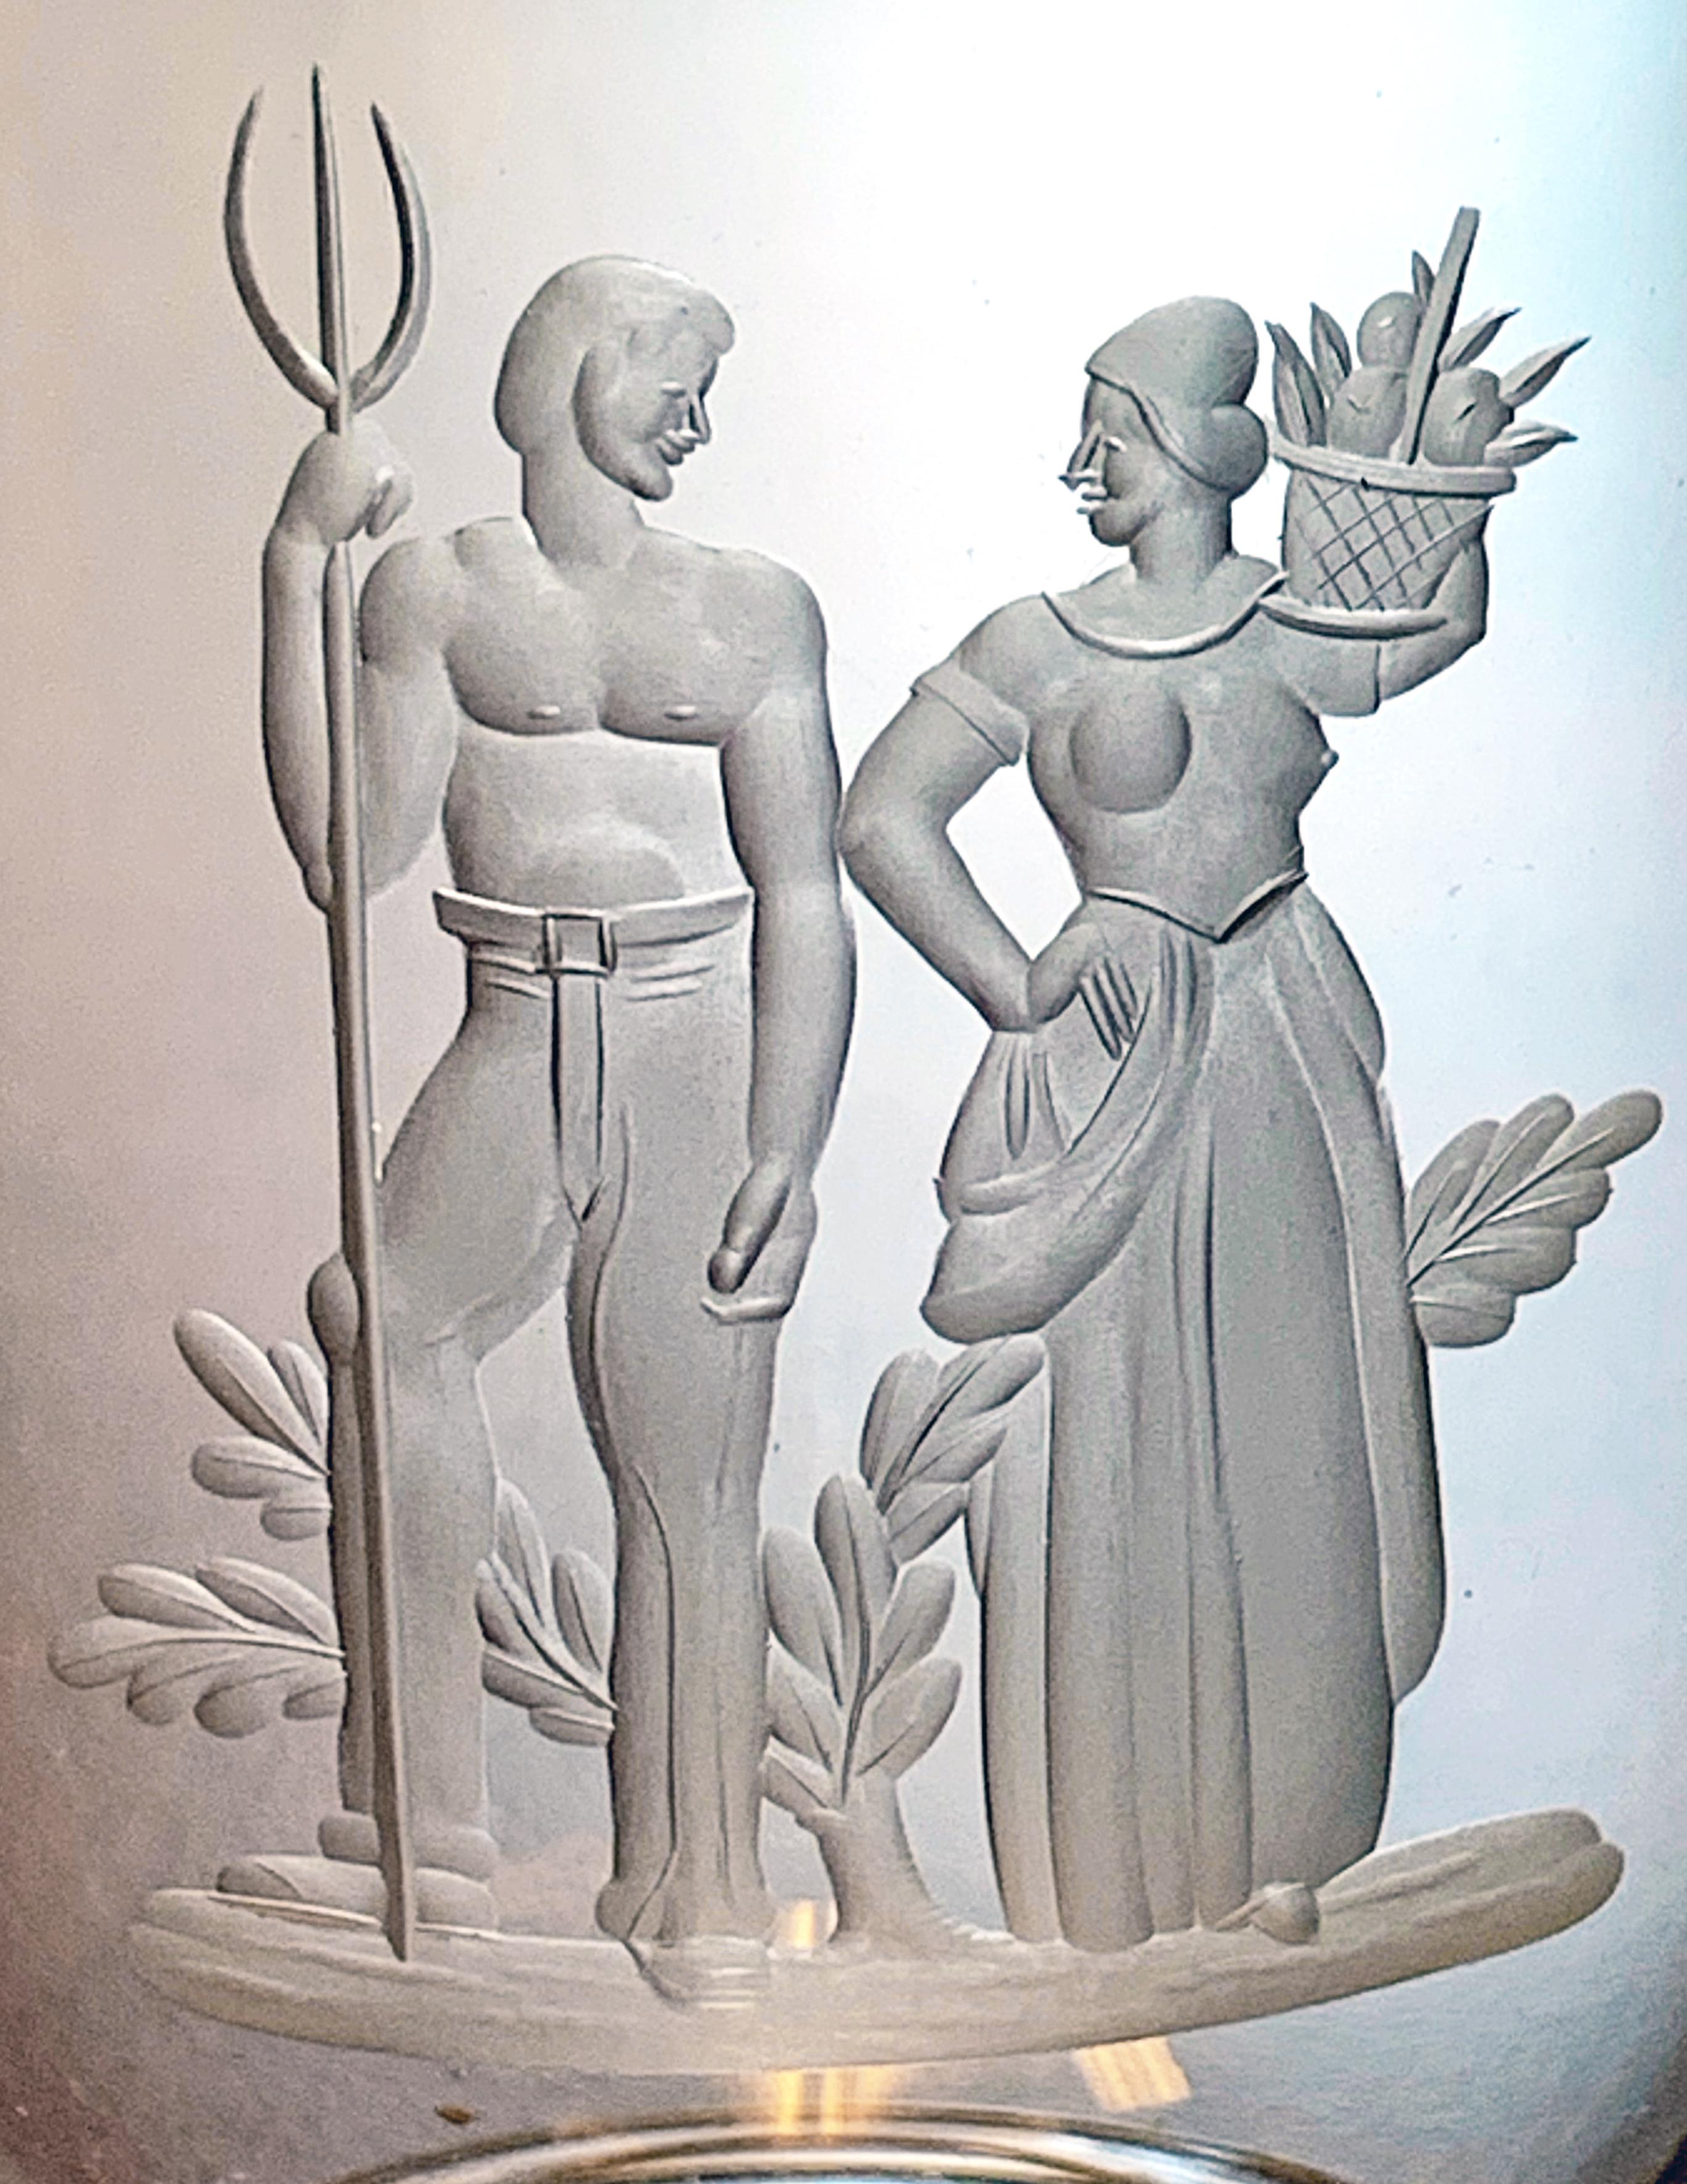 Designed by Sidney Waugh for the famed Steuben glass works, a part of the Corning Glass Company, this superbly engraved glass vase features a farming couple, the male figure holding a pitchfork and the female figure holding a basket of produce.